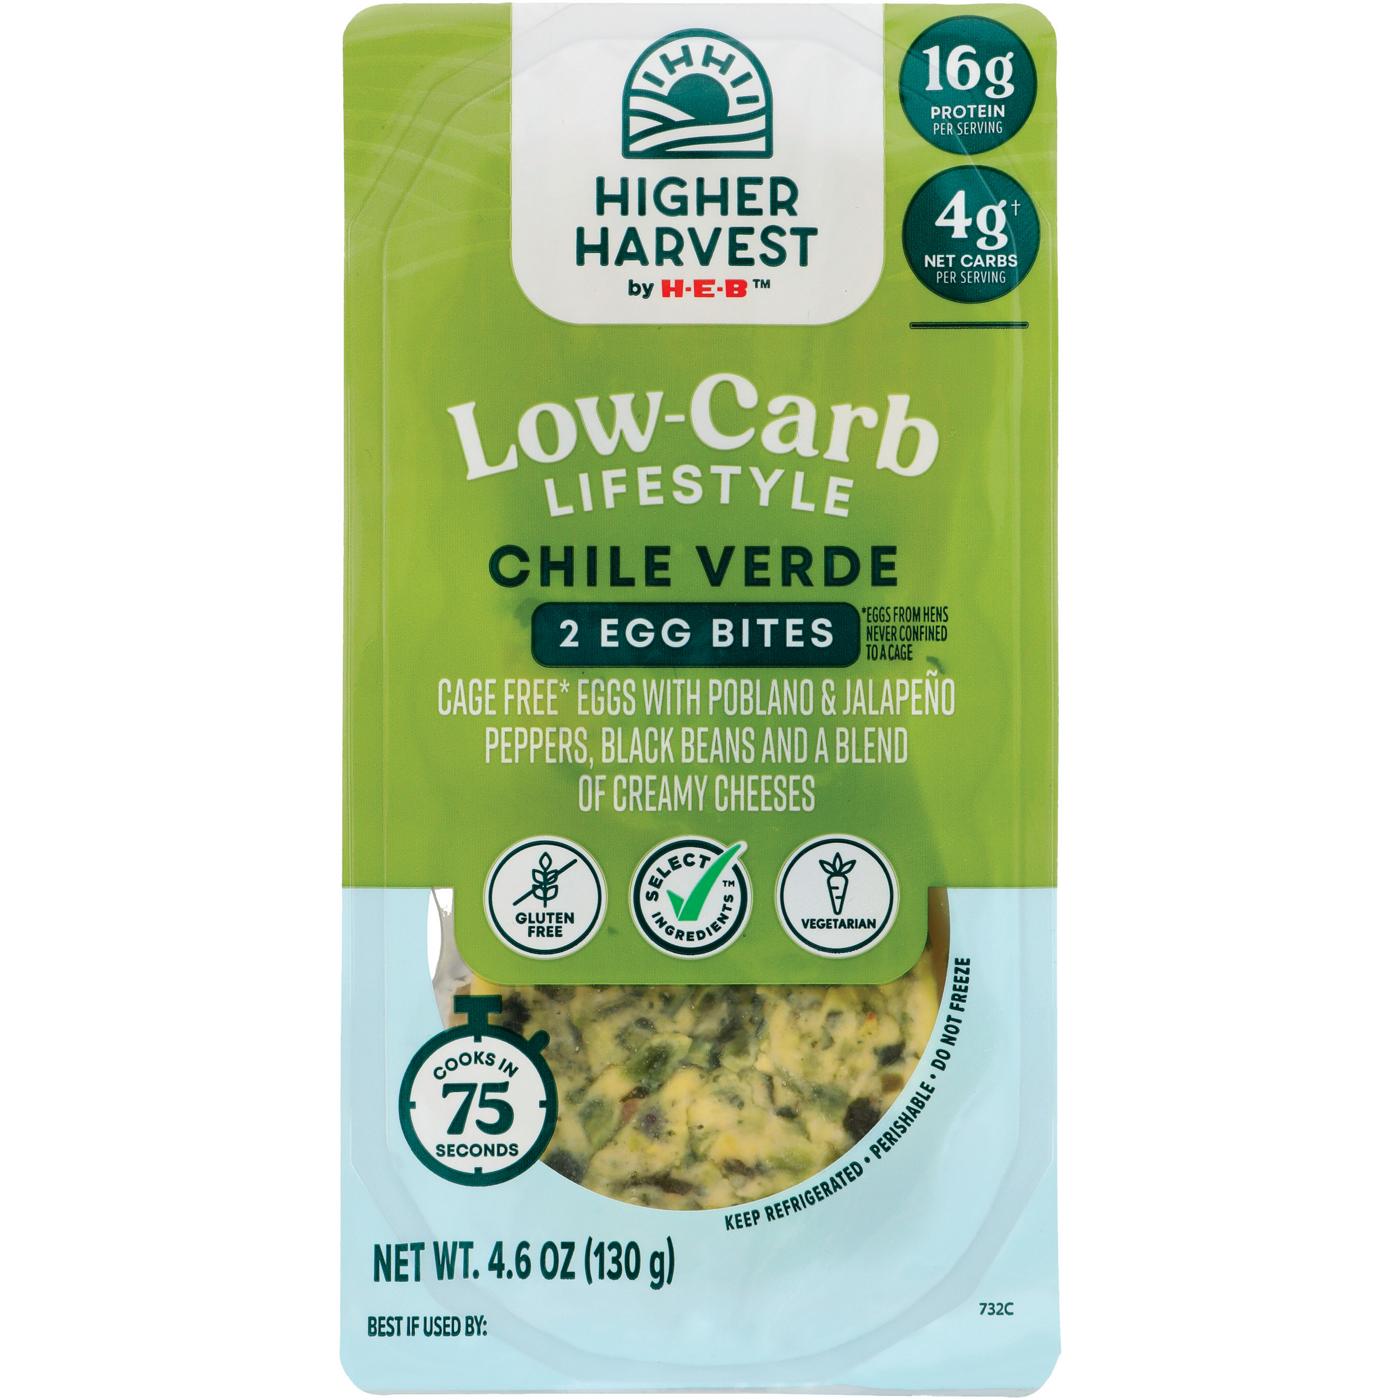 Higher Harvest by H-E-B Low-Carb Lifestyle Egg Bites – Chile Verde; image 1 of 2